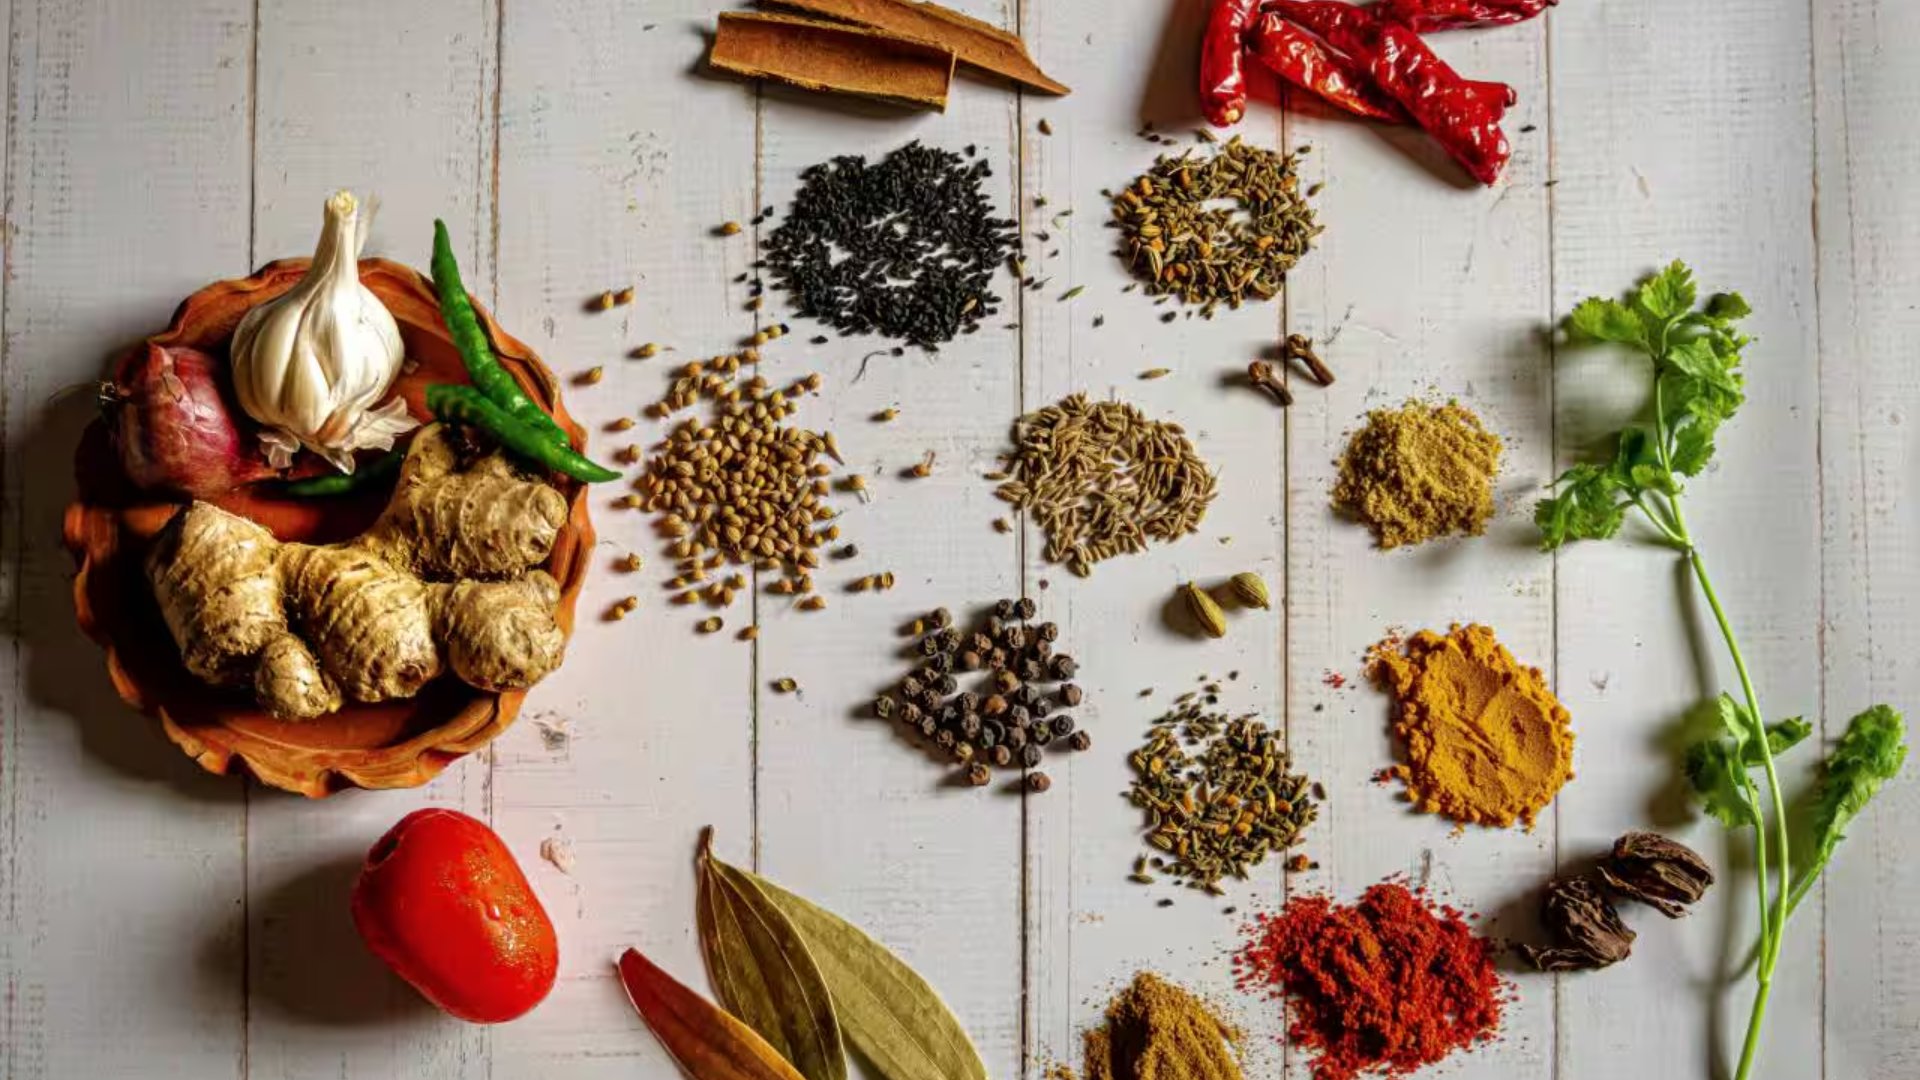 Indian Spice Giant MDH Faces Scrutiny Over Alleged Contamination, with 14.5% of US Shipments Rejected